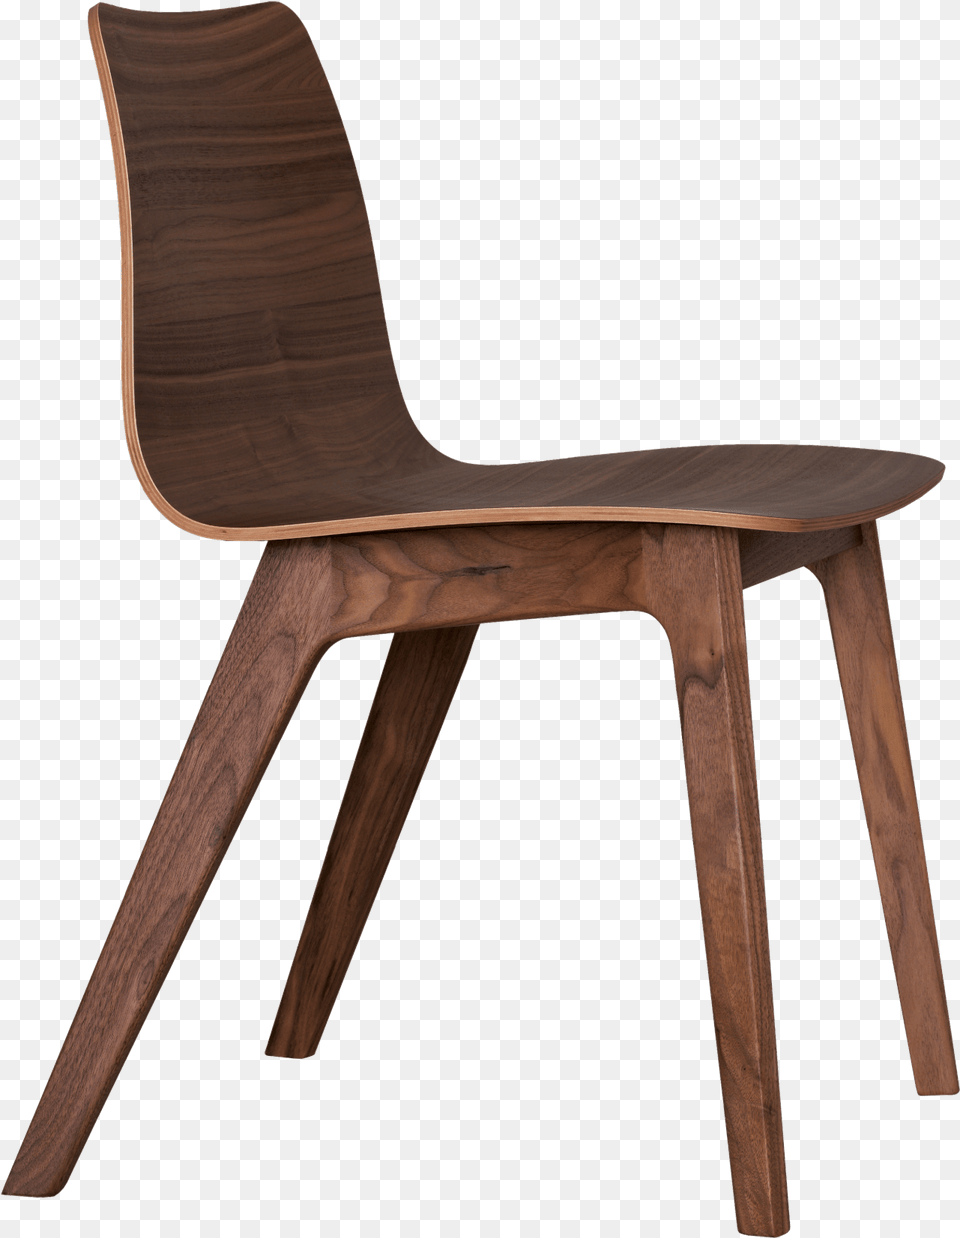 Zeitraum Morph, Furniture, Plywood, Wood, Chair Free Transparent Png